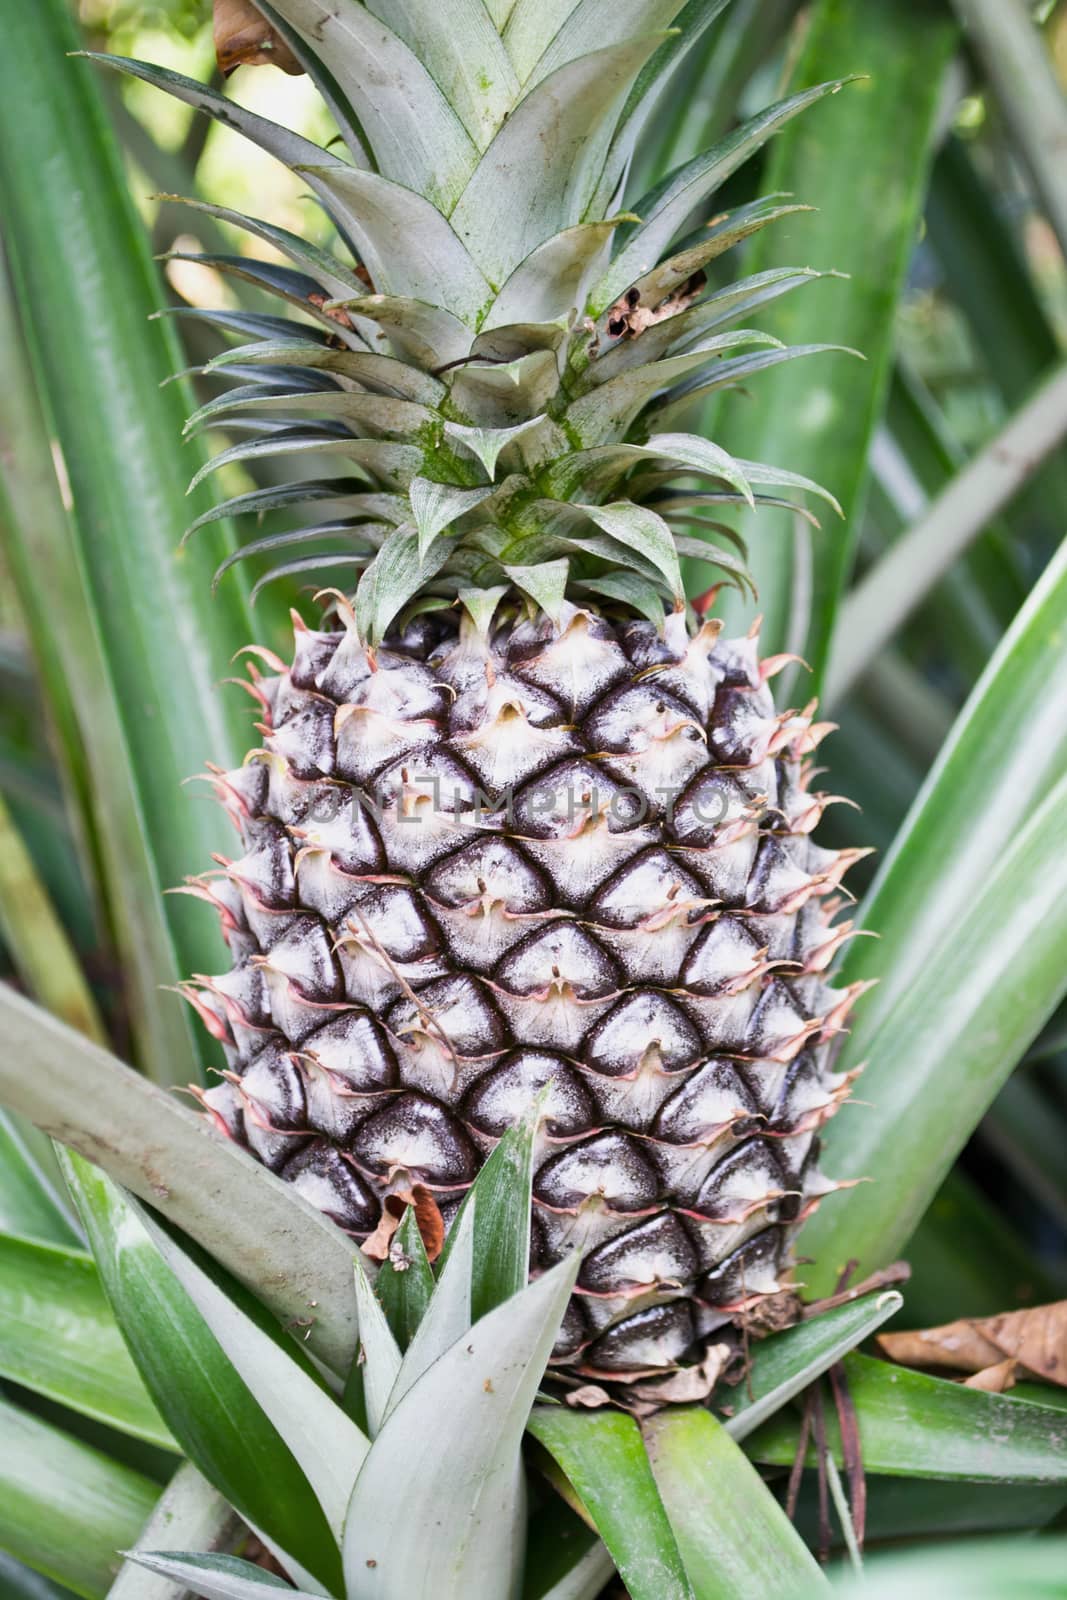 Pineapple fruit growing in a farm  by Thanamat